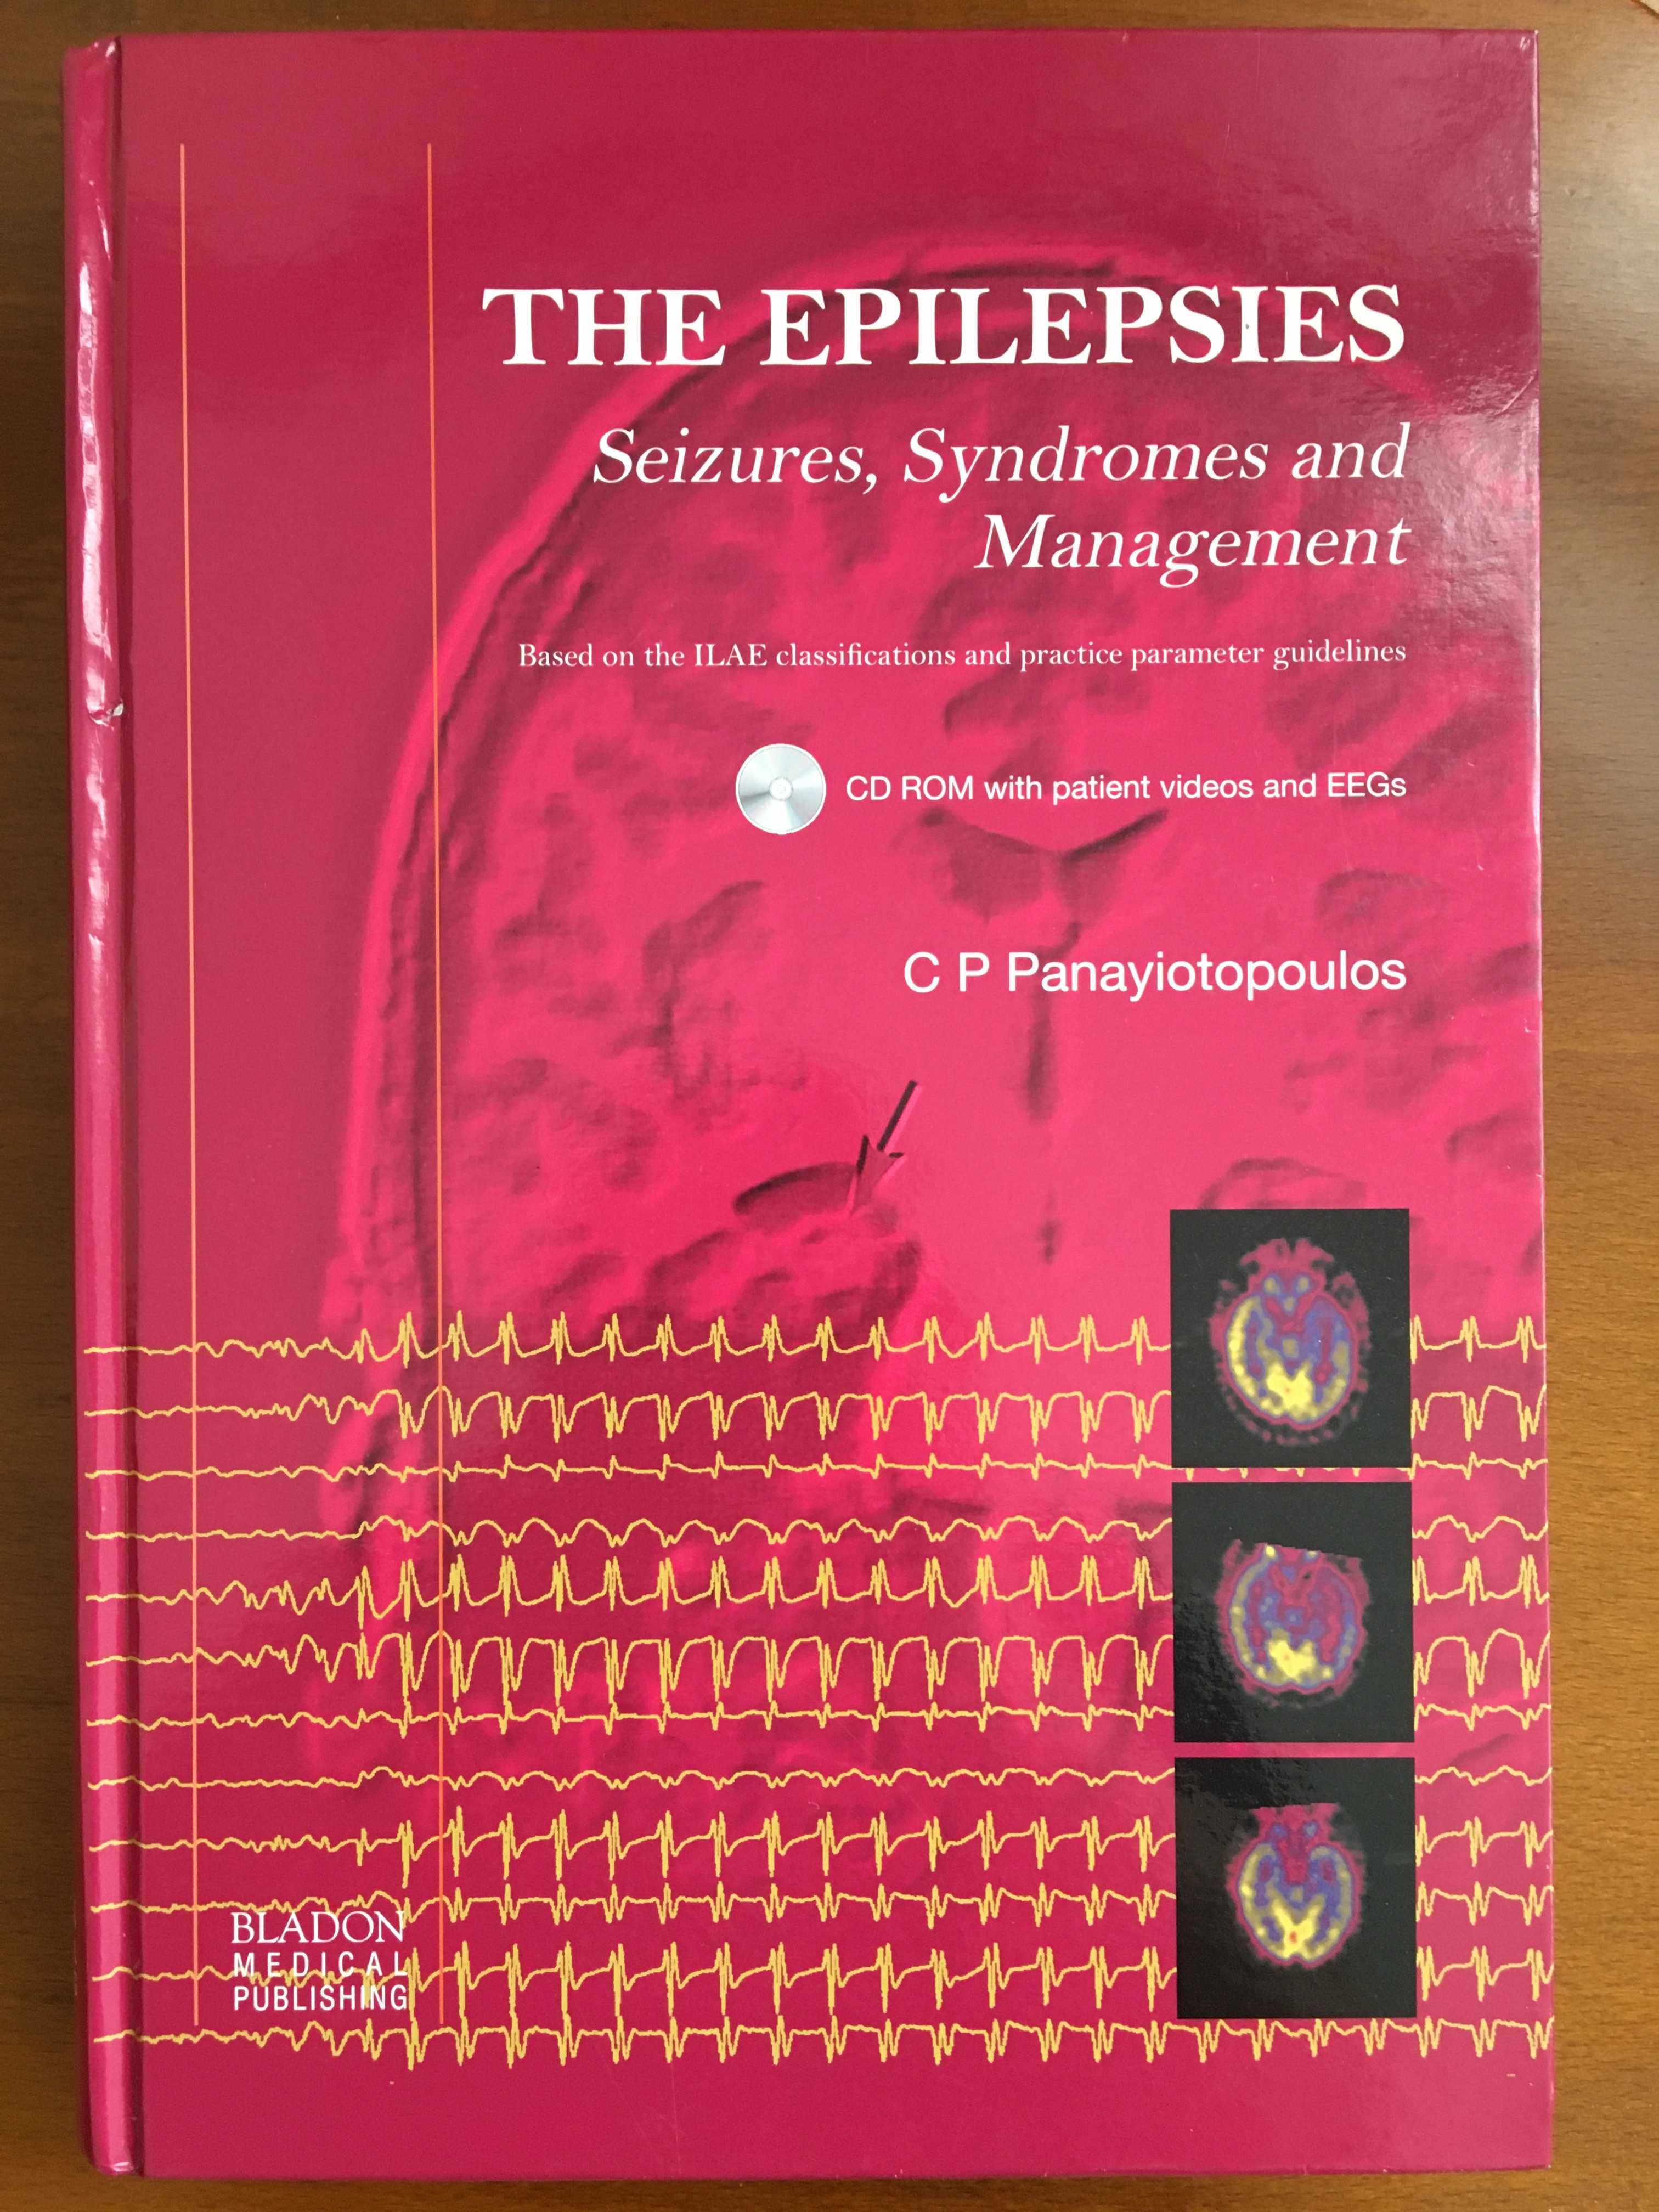 The Epilepsies: Seizures, Syndromes and Management